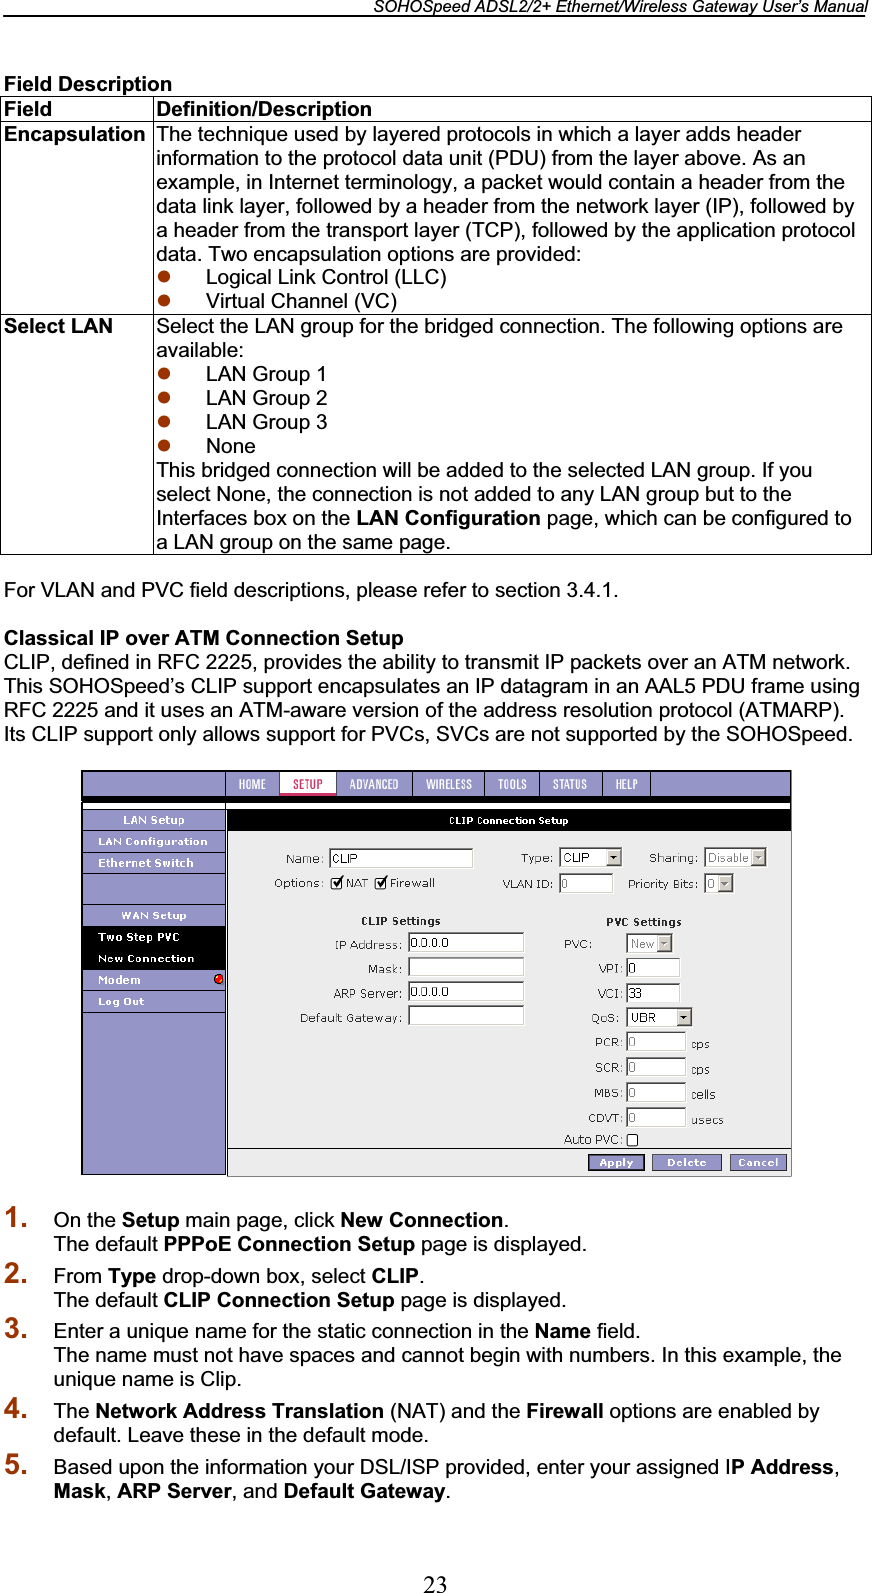 SOHOSpeed ADSL2/2+ Ethernet/Wireless Gateway User’s Manual 23Field Description Field Definition/Description Encapsulation  The technique used by layered protocols in which a layer adds header information to the protocol data unit (PDU) from the layer above. As an example, in Internet terminology, a packet would contain a header from the data link layer, followed by a header from the network layer (IP), followed by a header from the transport layer (TCP), followed by the application protocol data. Two encapsulation options are provided: z Logical Link Control (LLC) z Virtual Channel (VC) Select LAN  Select the LAN group for the bridged connection. The following options are available:z LAN Group 1 z LAN Group 2 z LAN Group 3 z None This bridged connection will be added to the selected LAN group. If you select None, the connection is not added to any LAN group but to the Interfaces box on the LAN Configuration page, which can be configured to a LAN group on the same page. For VLAN and PVC field descriptions, please refer to section 3.4.1. Classical IP over ATM Connection Setup CLIP, defined in RFC 2225, provides the ability to transmit IP packets over an ATM network. This SOHOSpeed’s CLIP support encapsulates an IP datagram in an AAL5 PDU frame using RFC 2225 and it uses an ATM-aware version of the address resolution protocol (ATMARP). Its CLIP support only allows support for PVCs, SVCs are not supported by the SOHOSpeed. 1. On the Setup main page, click New Connection.The default PPPoE Connection Setup page is displayed. 2. From Type drop-down box, select CLIP.The default CLIP Connection Setup page is displayed. 3. Enter a unique name for the static connection in the Name field. The name must not have spaces and cannot begin with numbers. In this example, the unique name is Clip. 4. The Network Address Translation (NAT) and the Firewall options are enabled by default. Leave these in the default mode. 5. Based upon the information your DSL/ISP provided, enter your assigned IP Address,Mask,ARP Server, and Default Gateway.